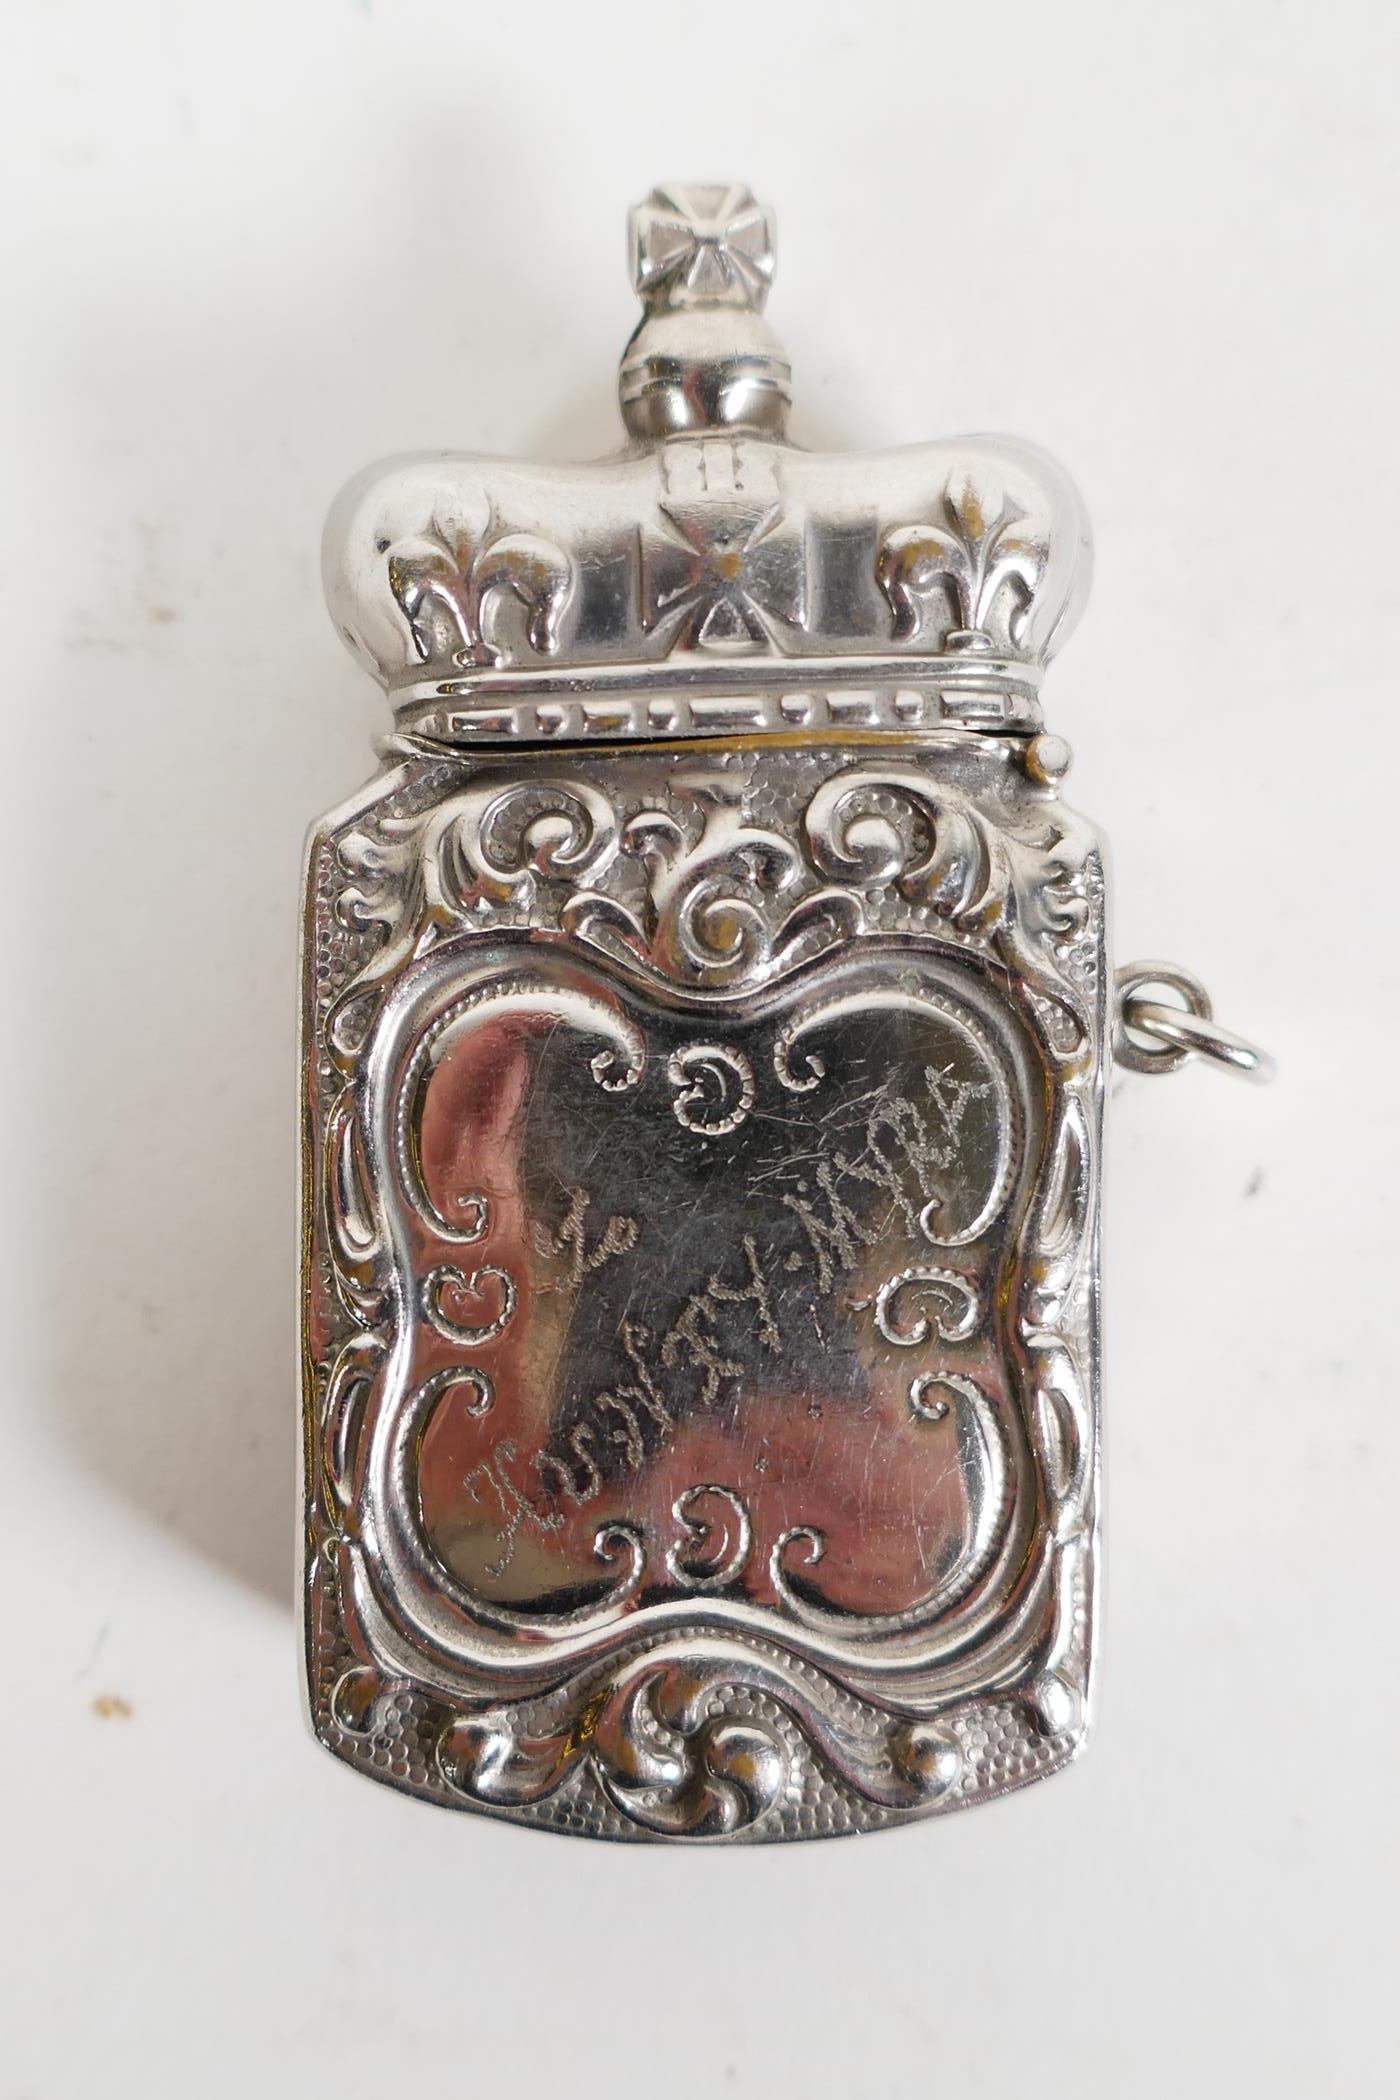 Three decorative Victorian and early C20th match safe vesta cases; one silver plated and topped with - Image 5 of 8